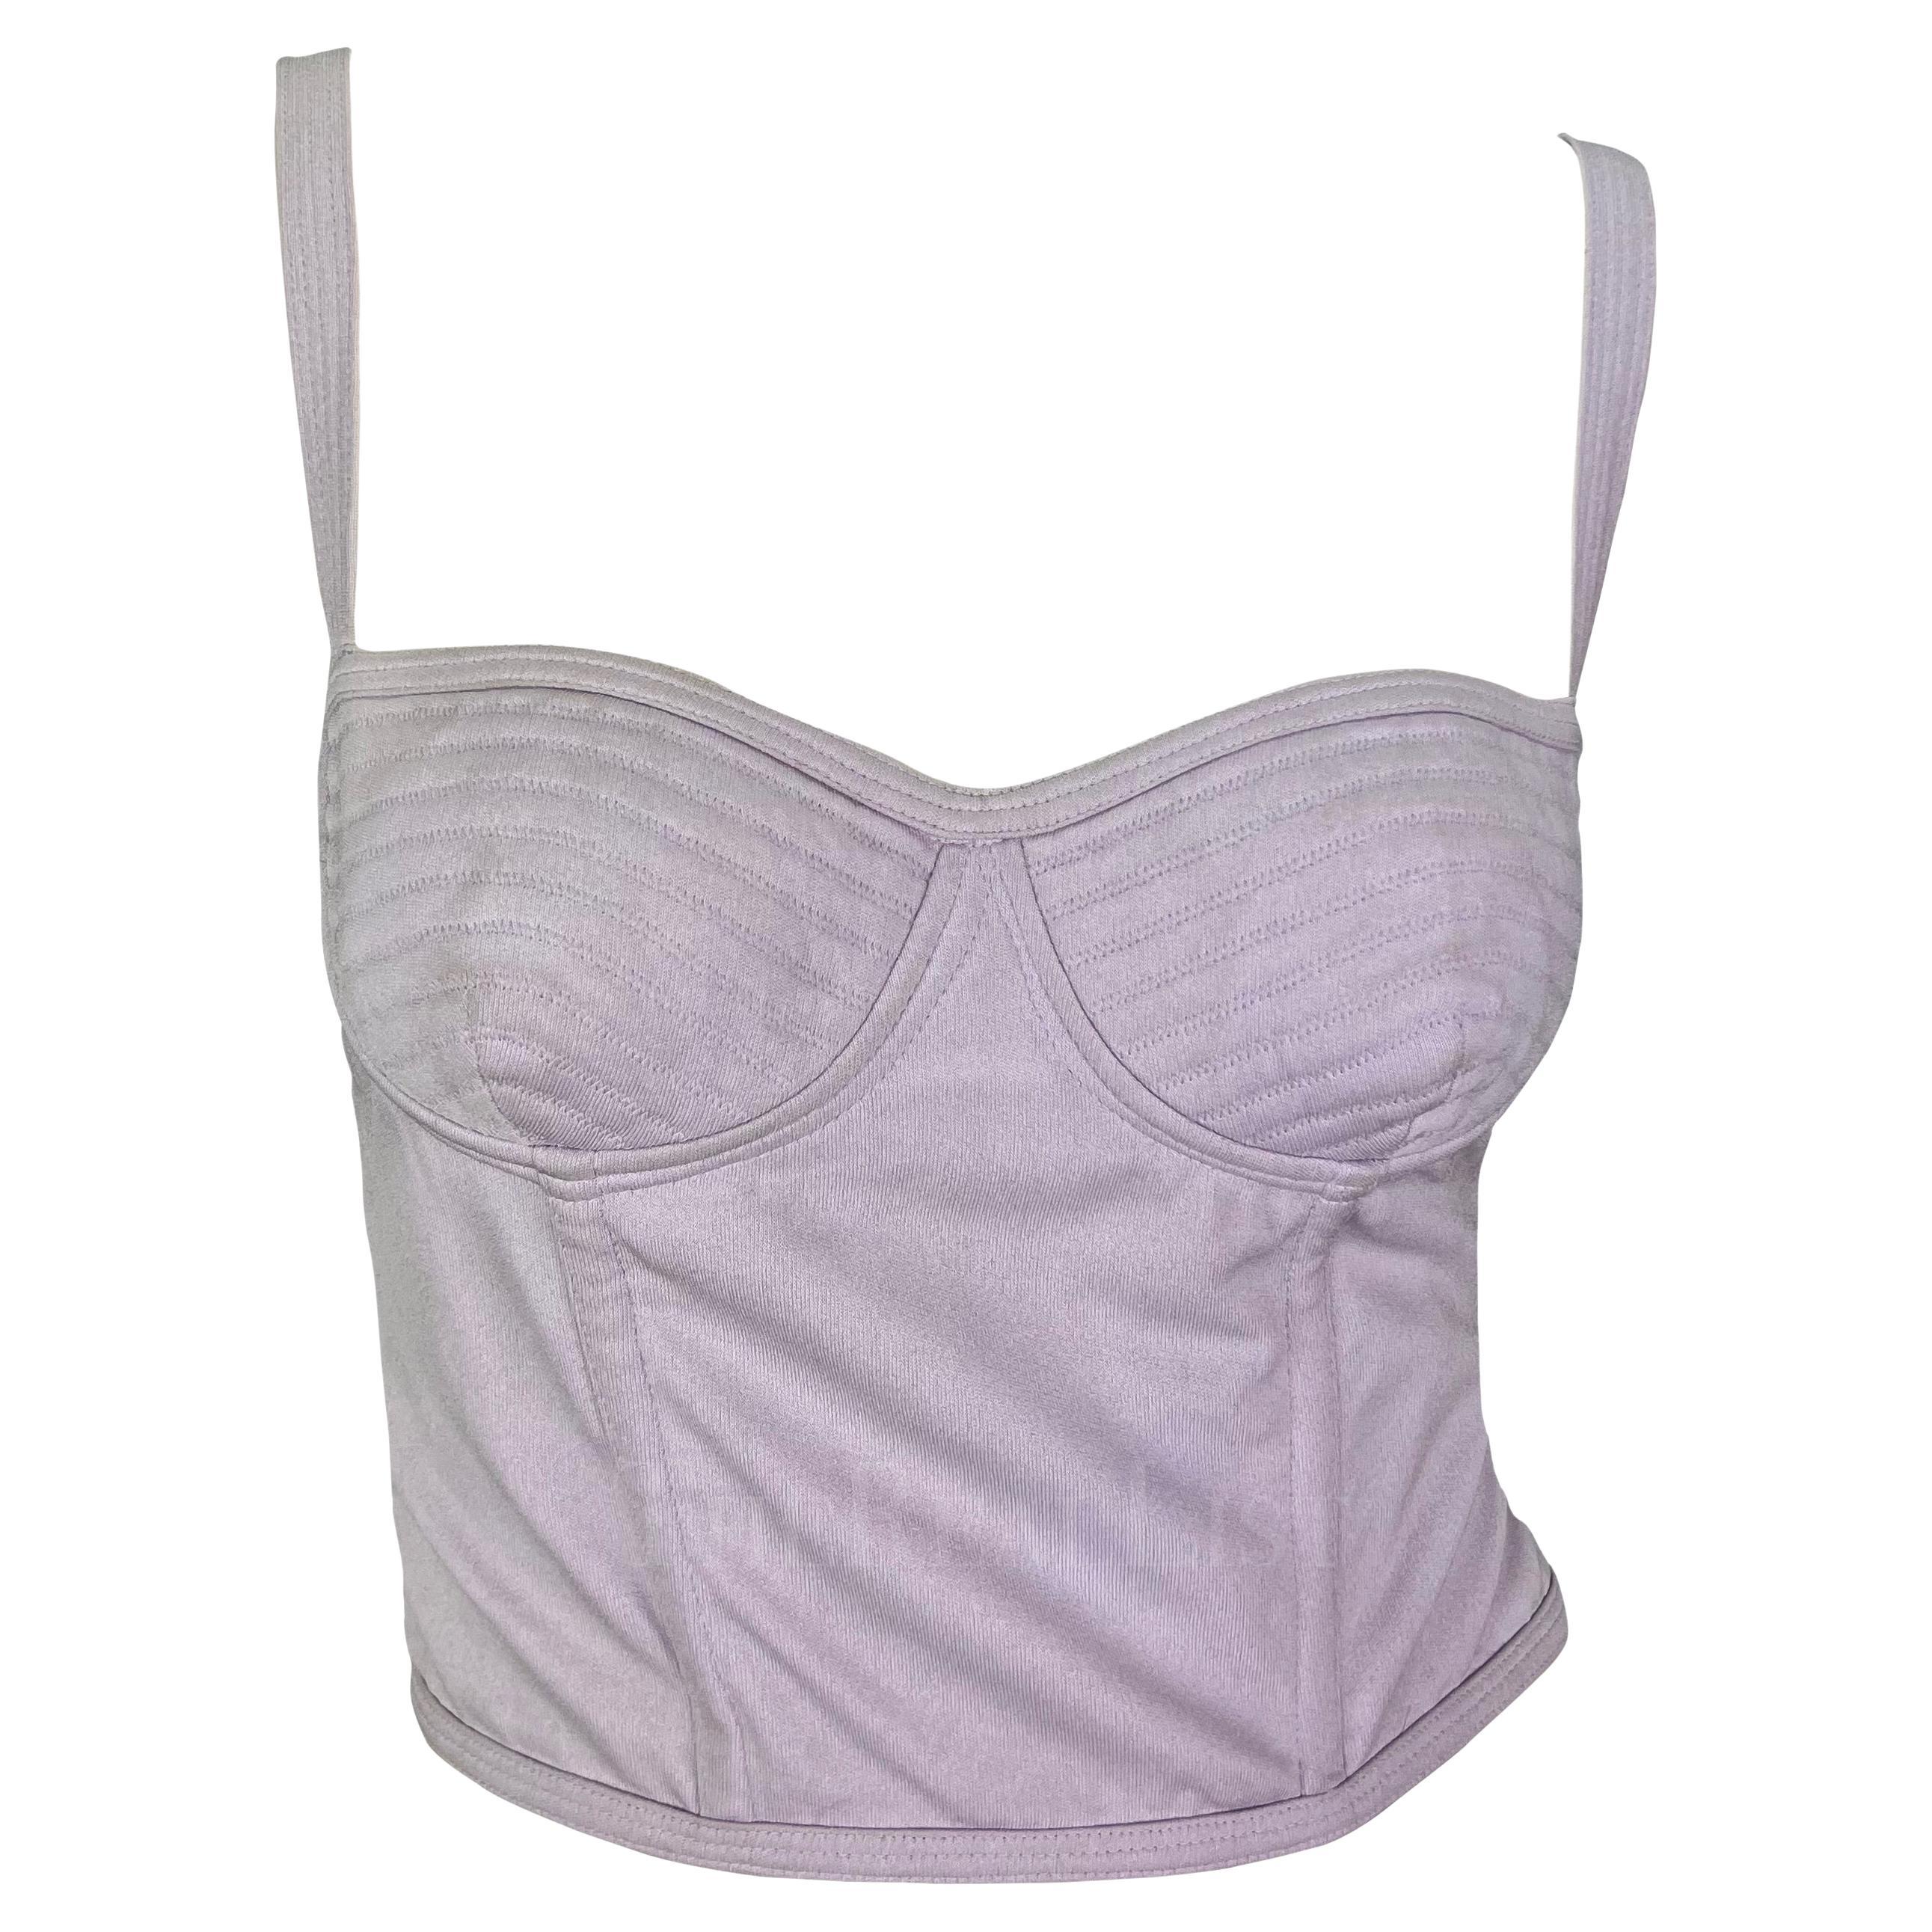 S/S 1995 Gianni Versace Lavender Purple Quilted Boned Corset Bustier Crop Top For Sale